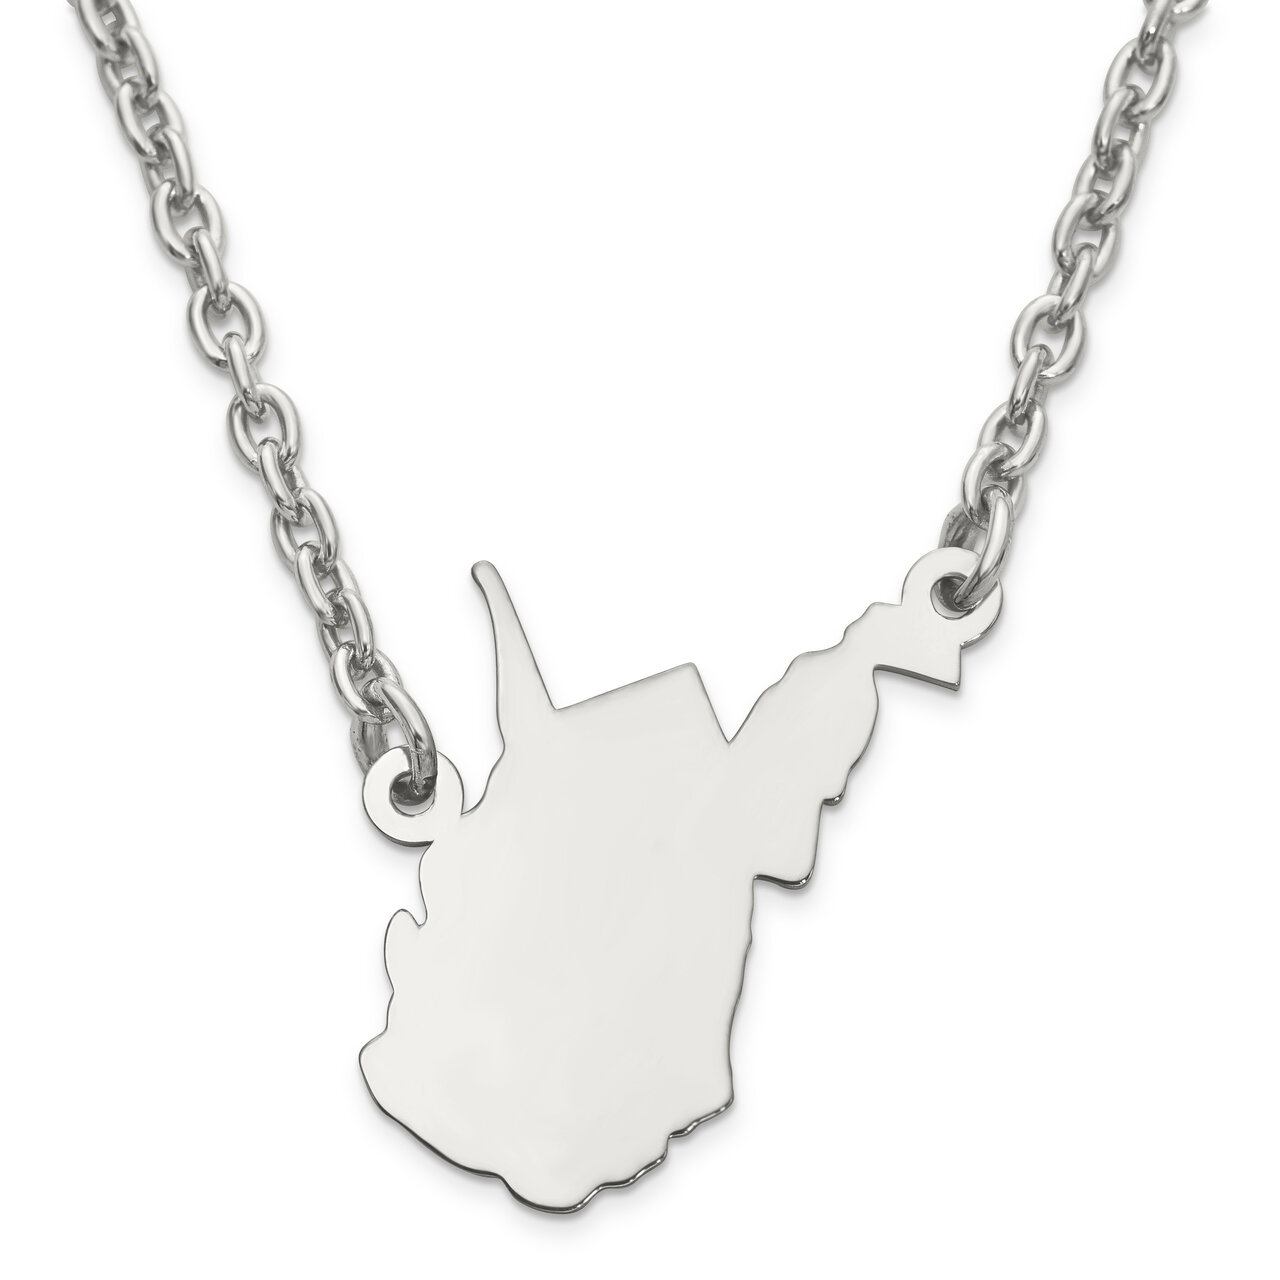 West Virginia State Pendant Necklace with Chain 14k White Gold Engravable XNA706W-WV